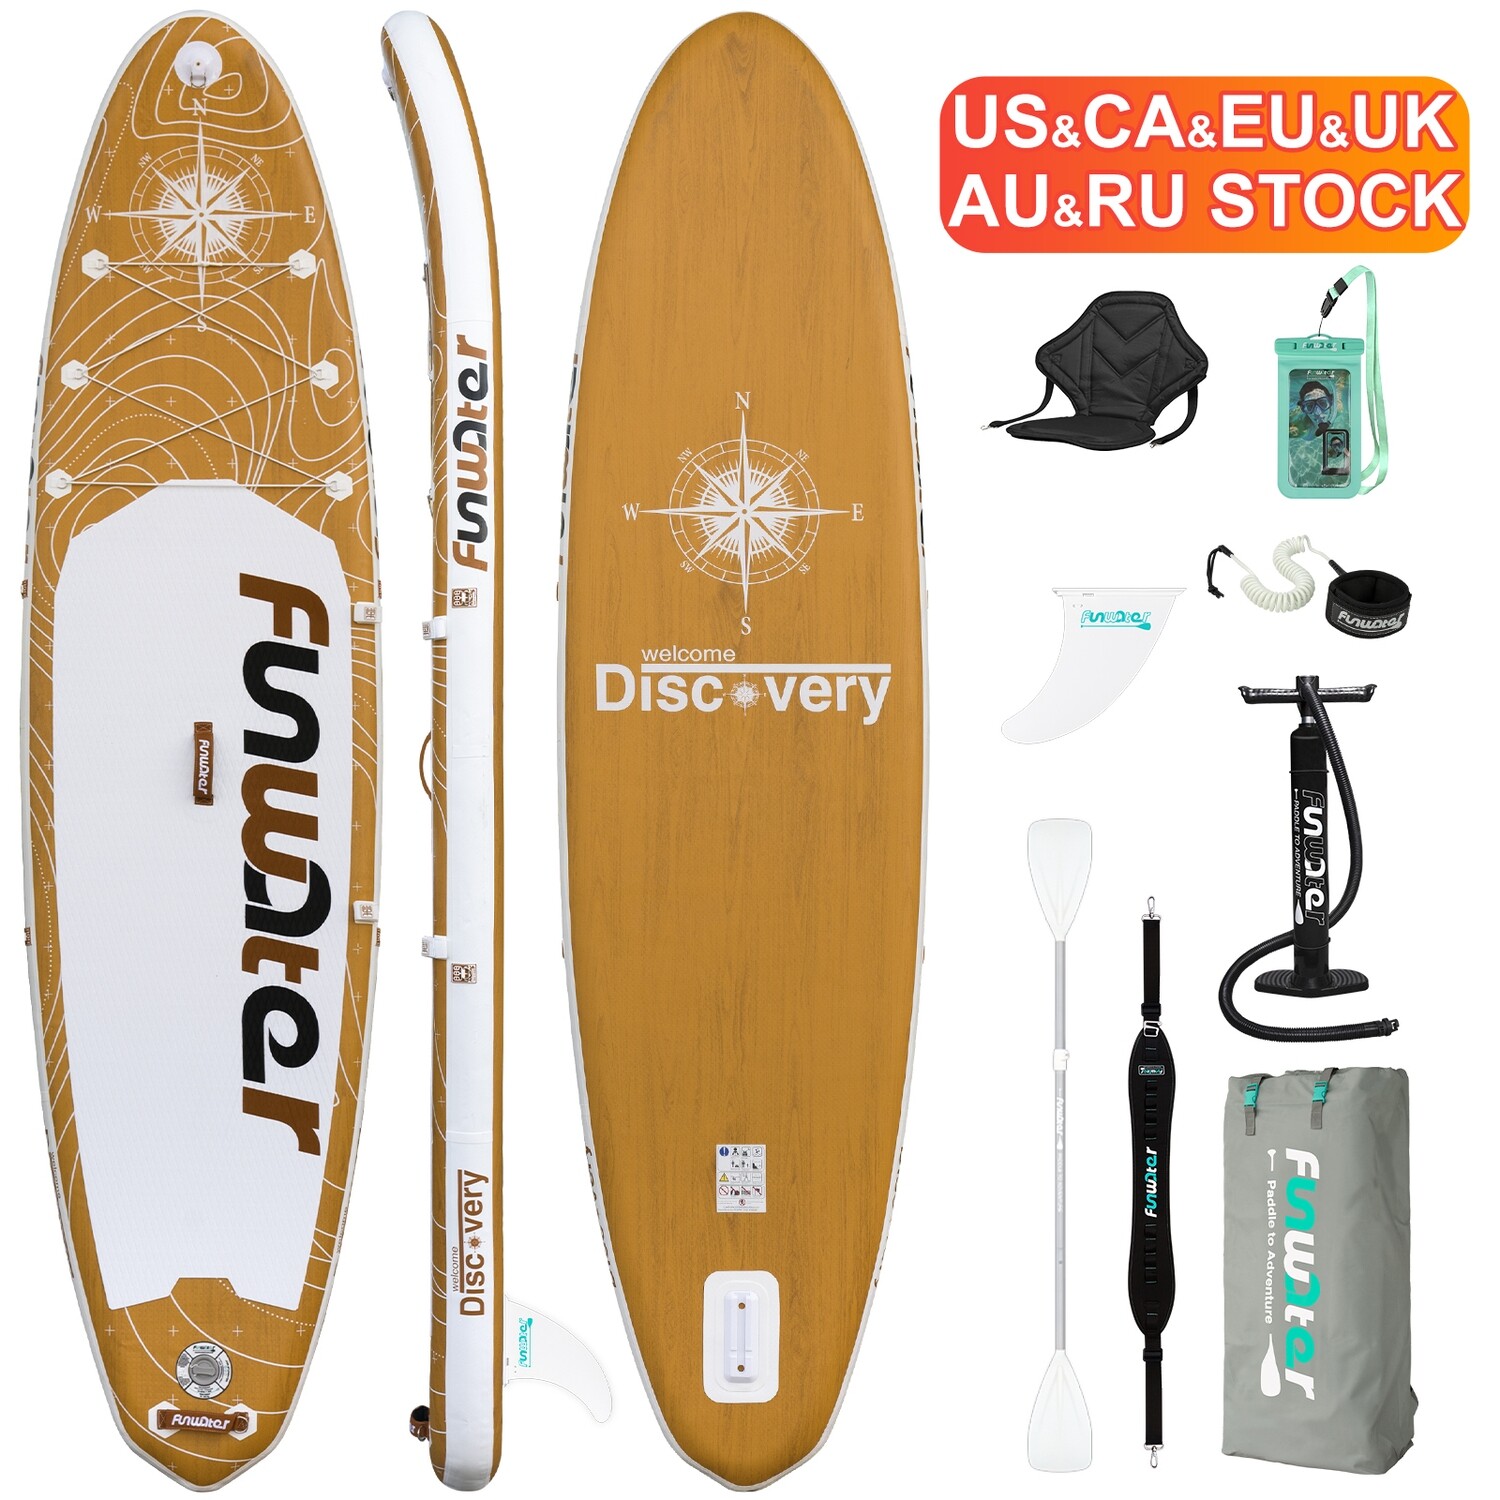 FUNWATER Dropshipping OEM paddleboard gonflable paddle board wood stand up paddle surf softboard surf wholesale surfboard uk eu